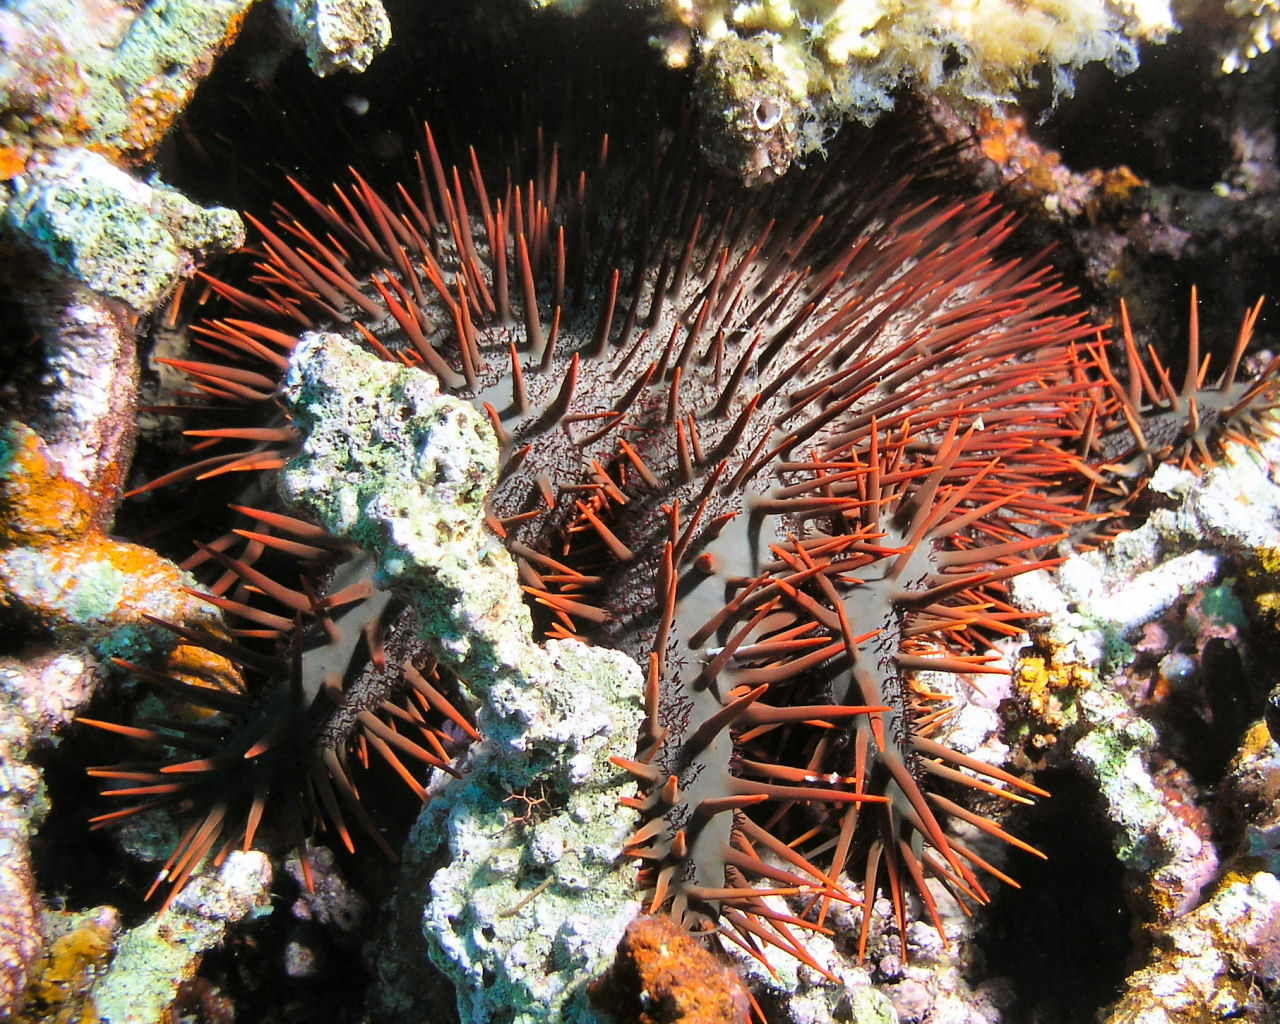 Crown of Thorns starfish at Kirsty Janes